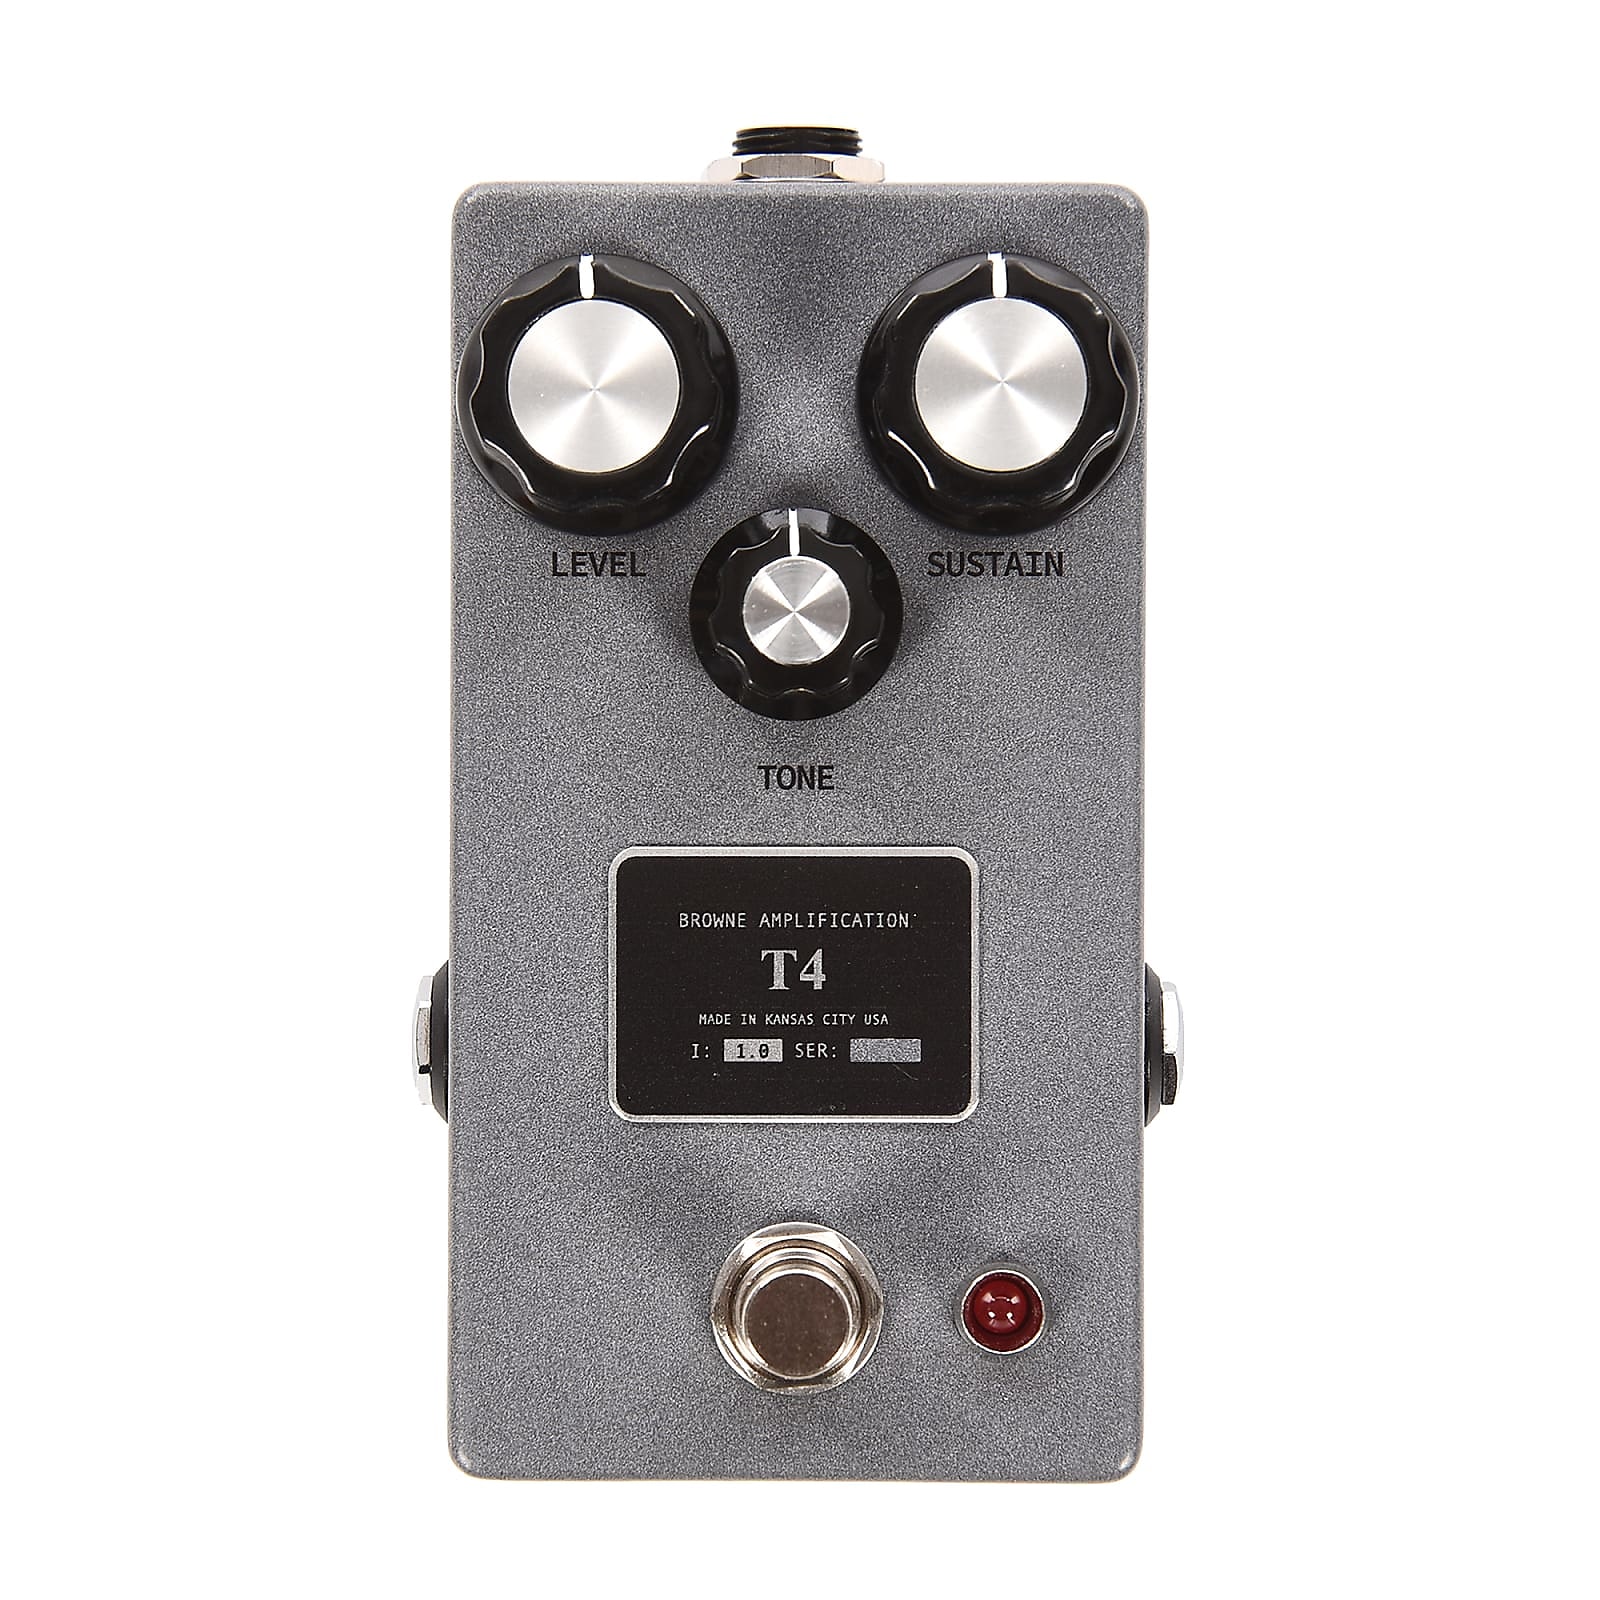 Browne Amplification T4 Fuzz | Reverb